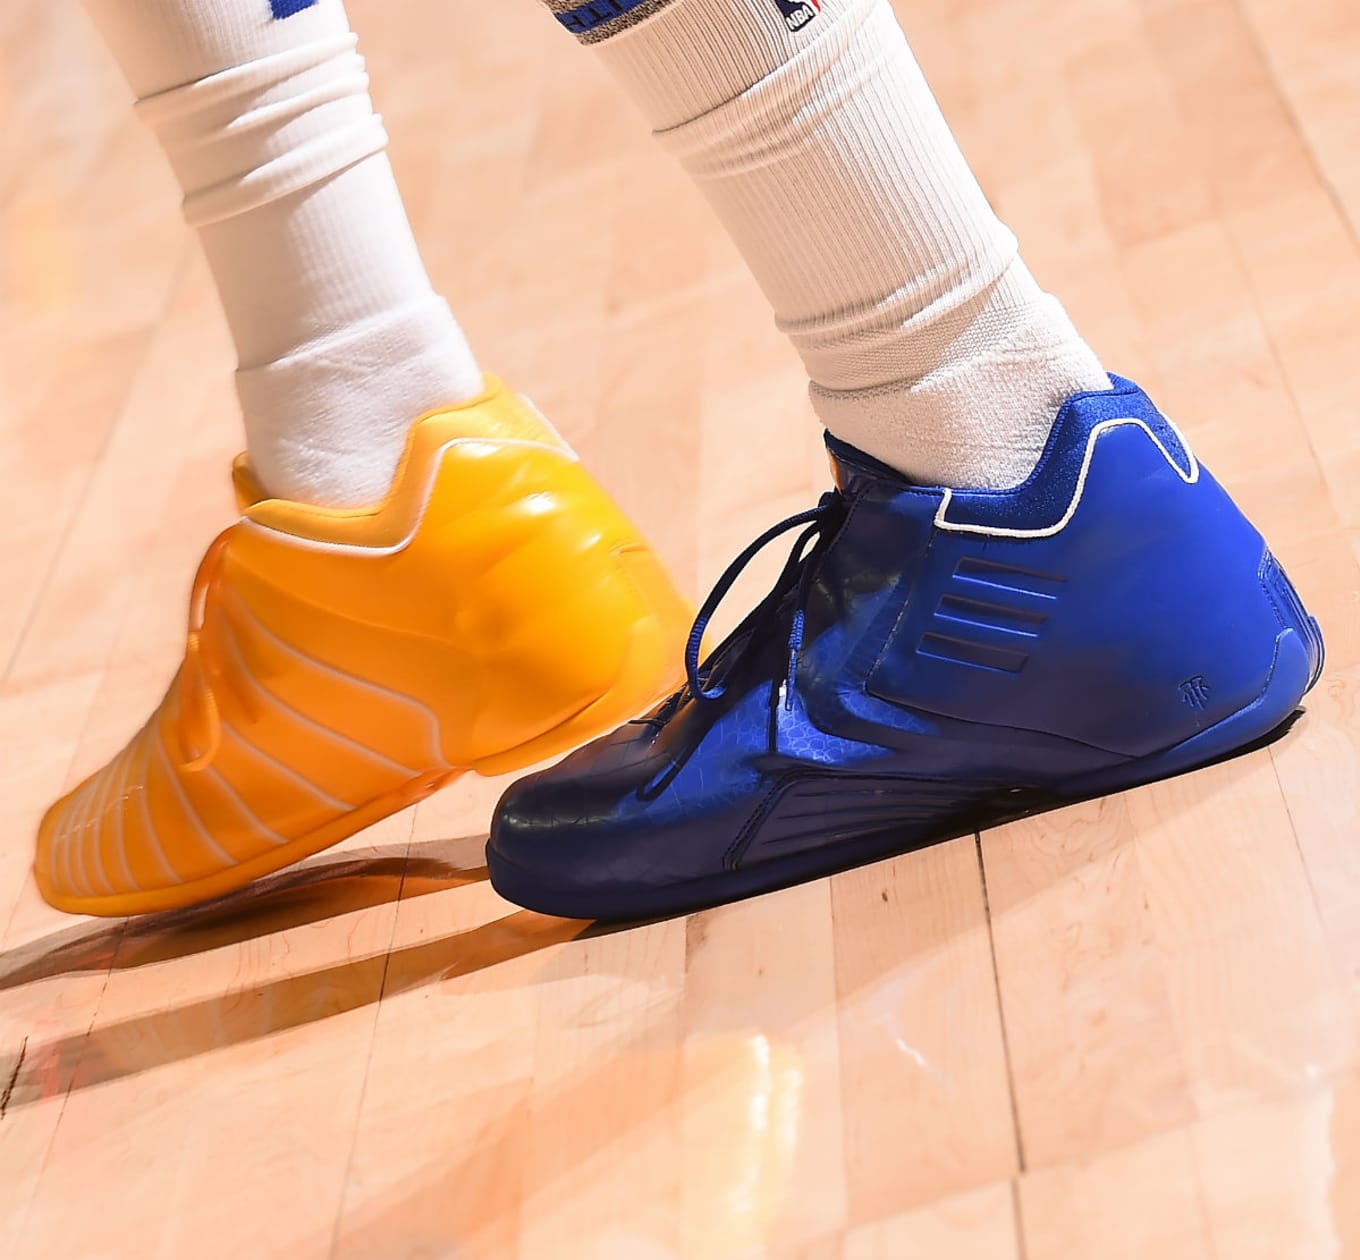 Nick Young Adidas TMac 3 Mismatched | Sole Collector